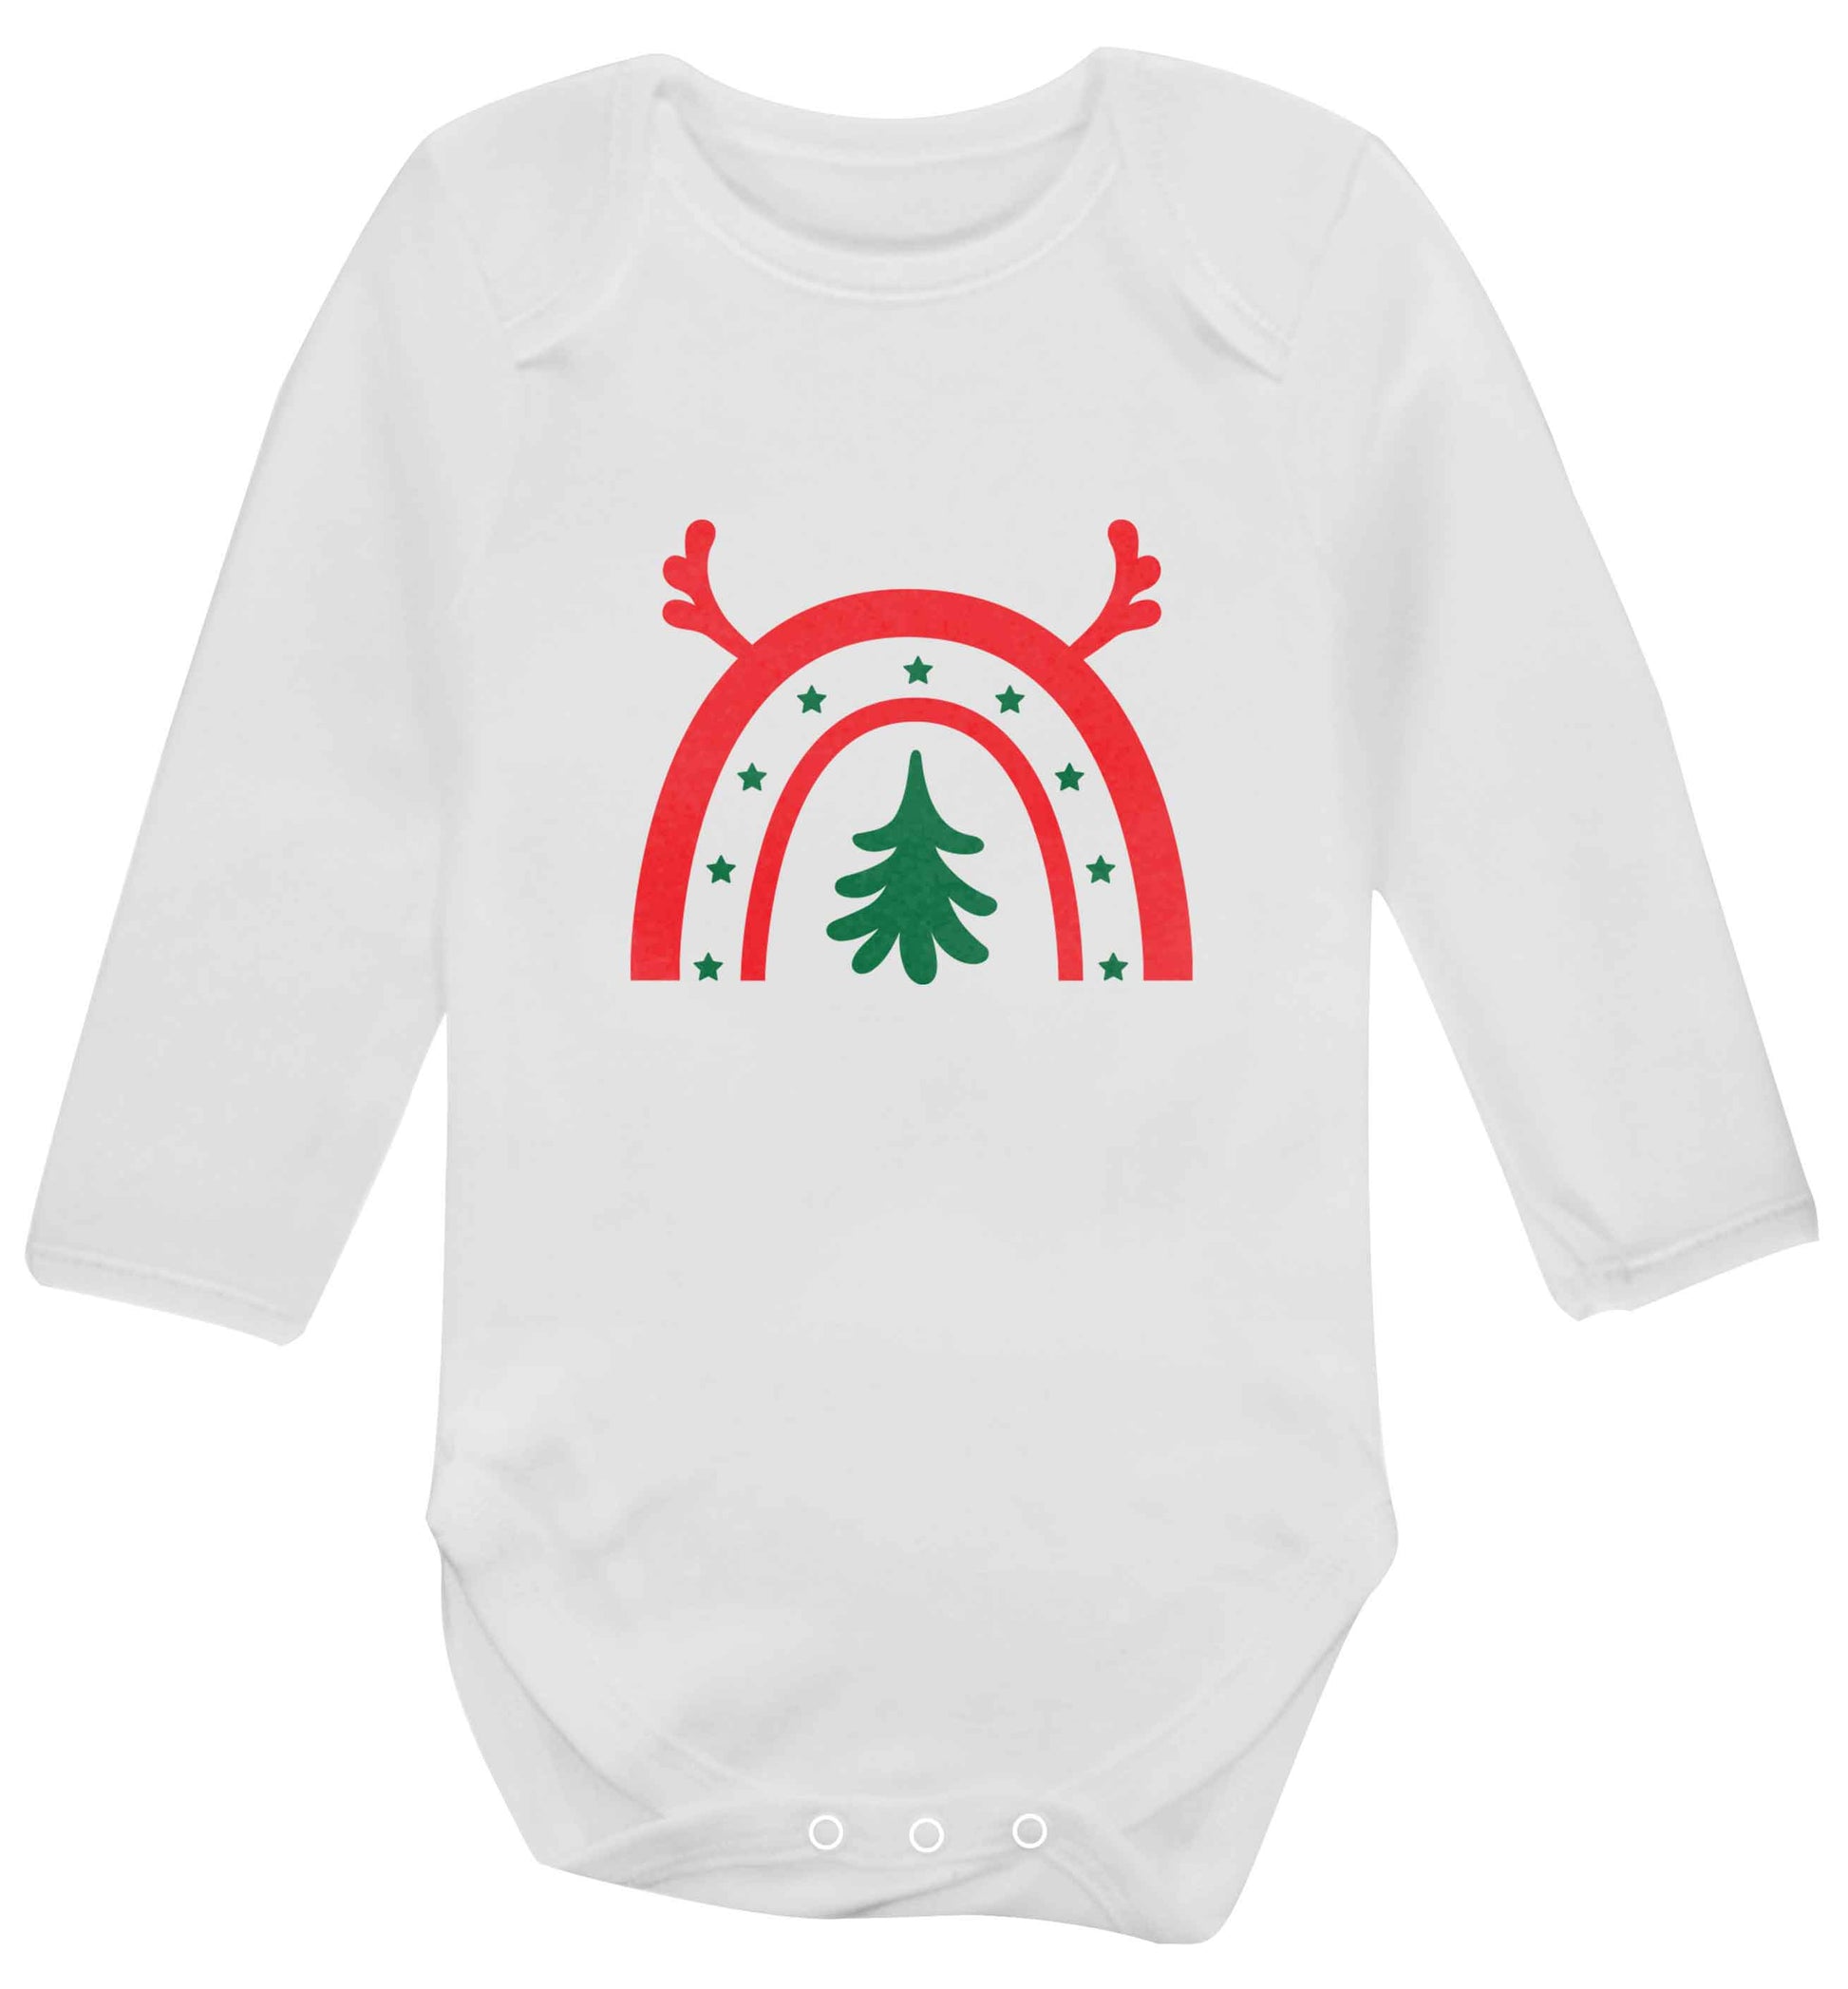 Christmas rainbow baby vest long sleeved white 6-12 months